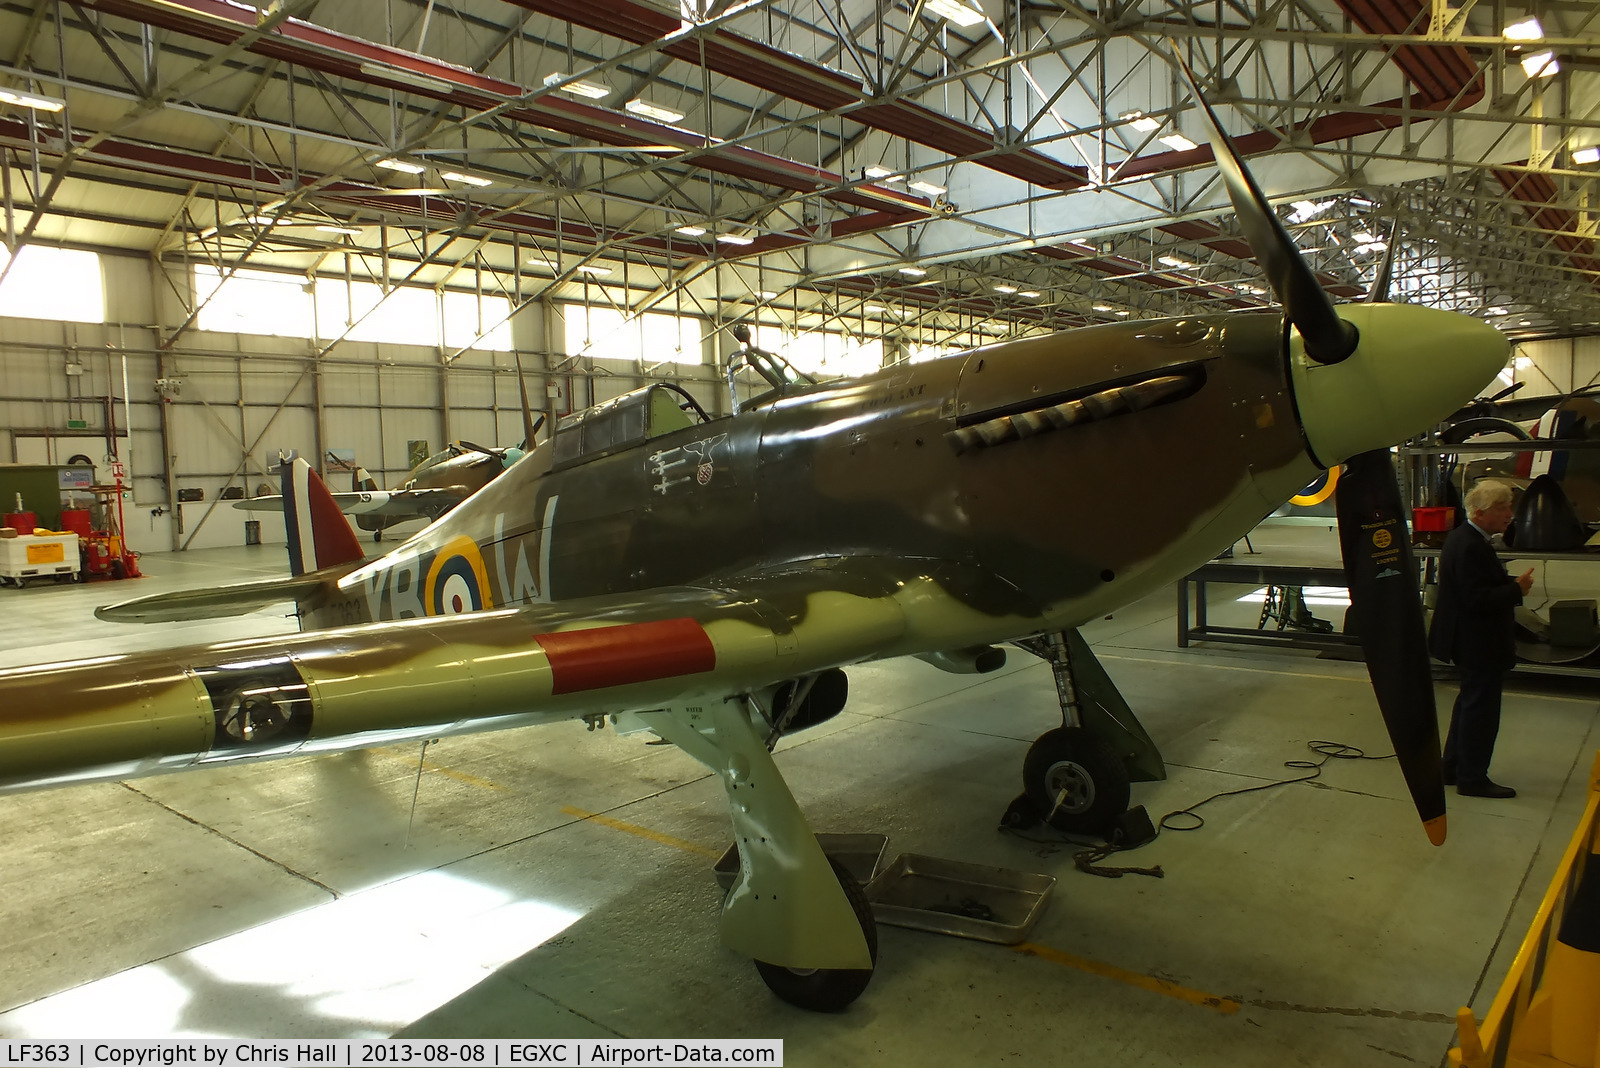 LF363, 1944 Hawker Hurricane IIC C/N 41H/469290, LF363 was built at the Hawker factory at Langley near Slough. It first flew in January 1944 and is believed to be the last Hurricane to enter service with the RAF